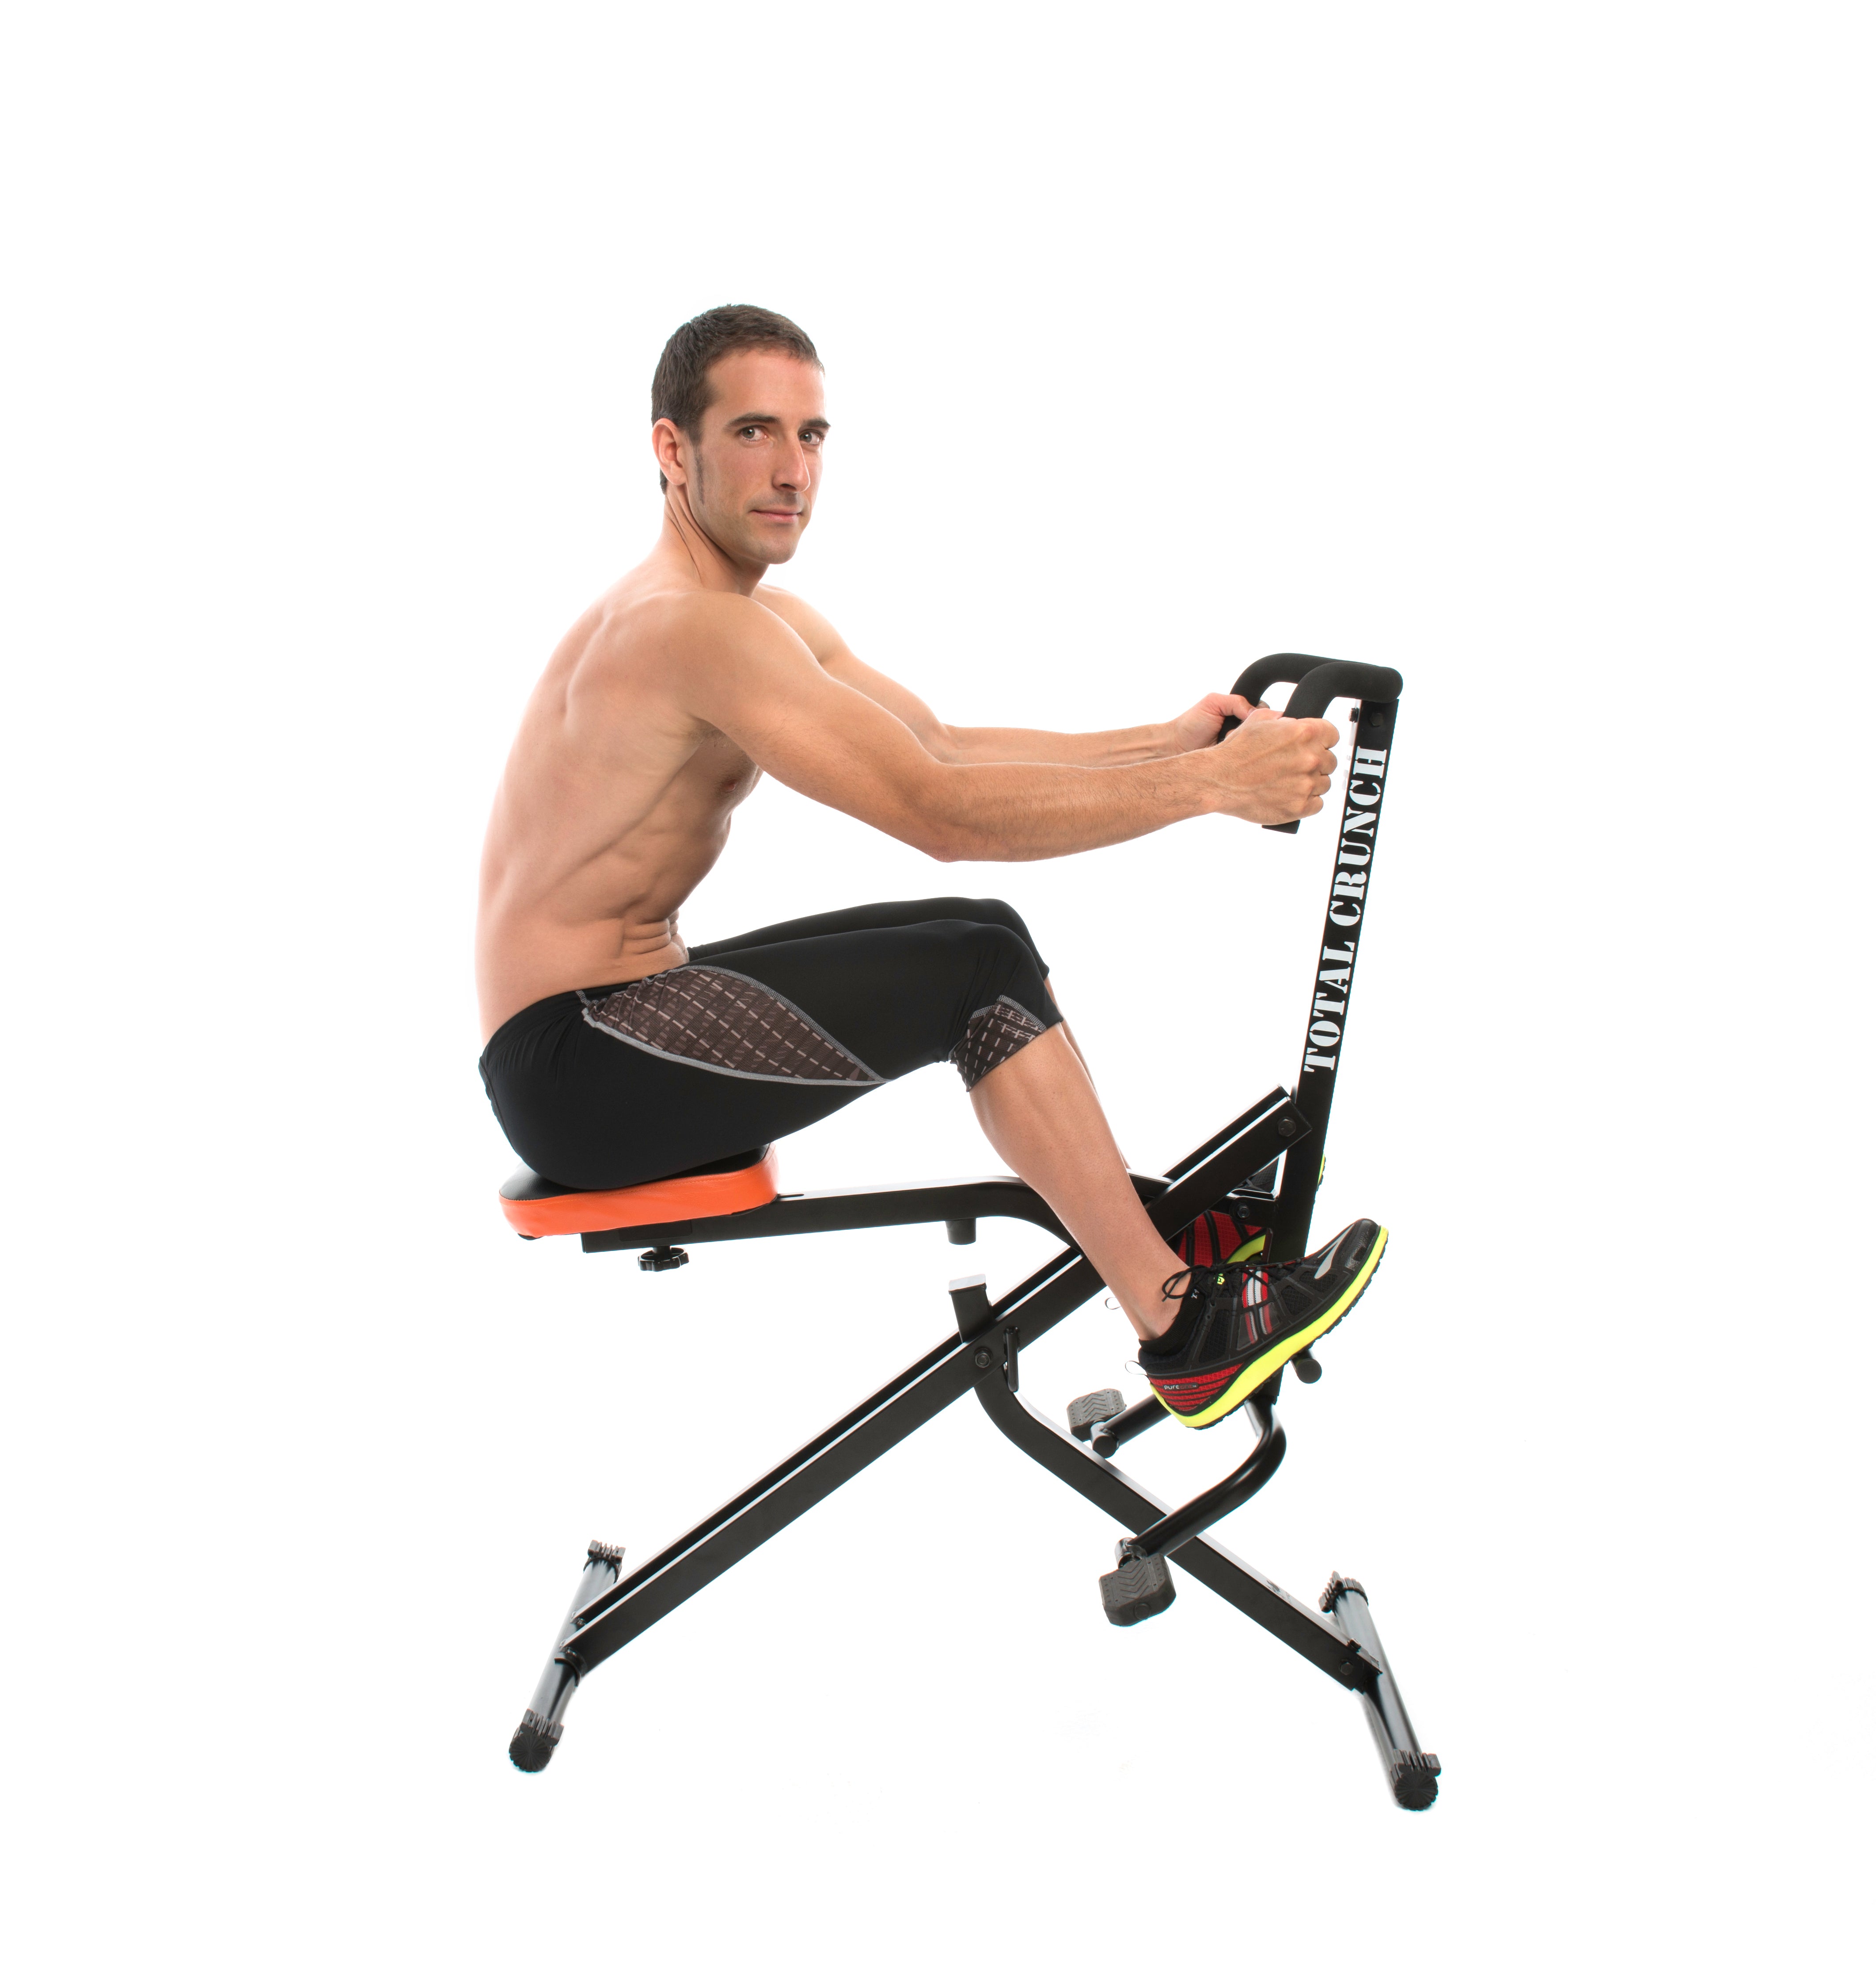 Total Crunch Whole Body Workout Exercise Machine